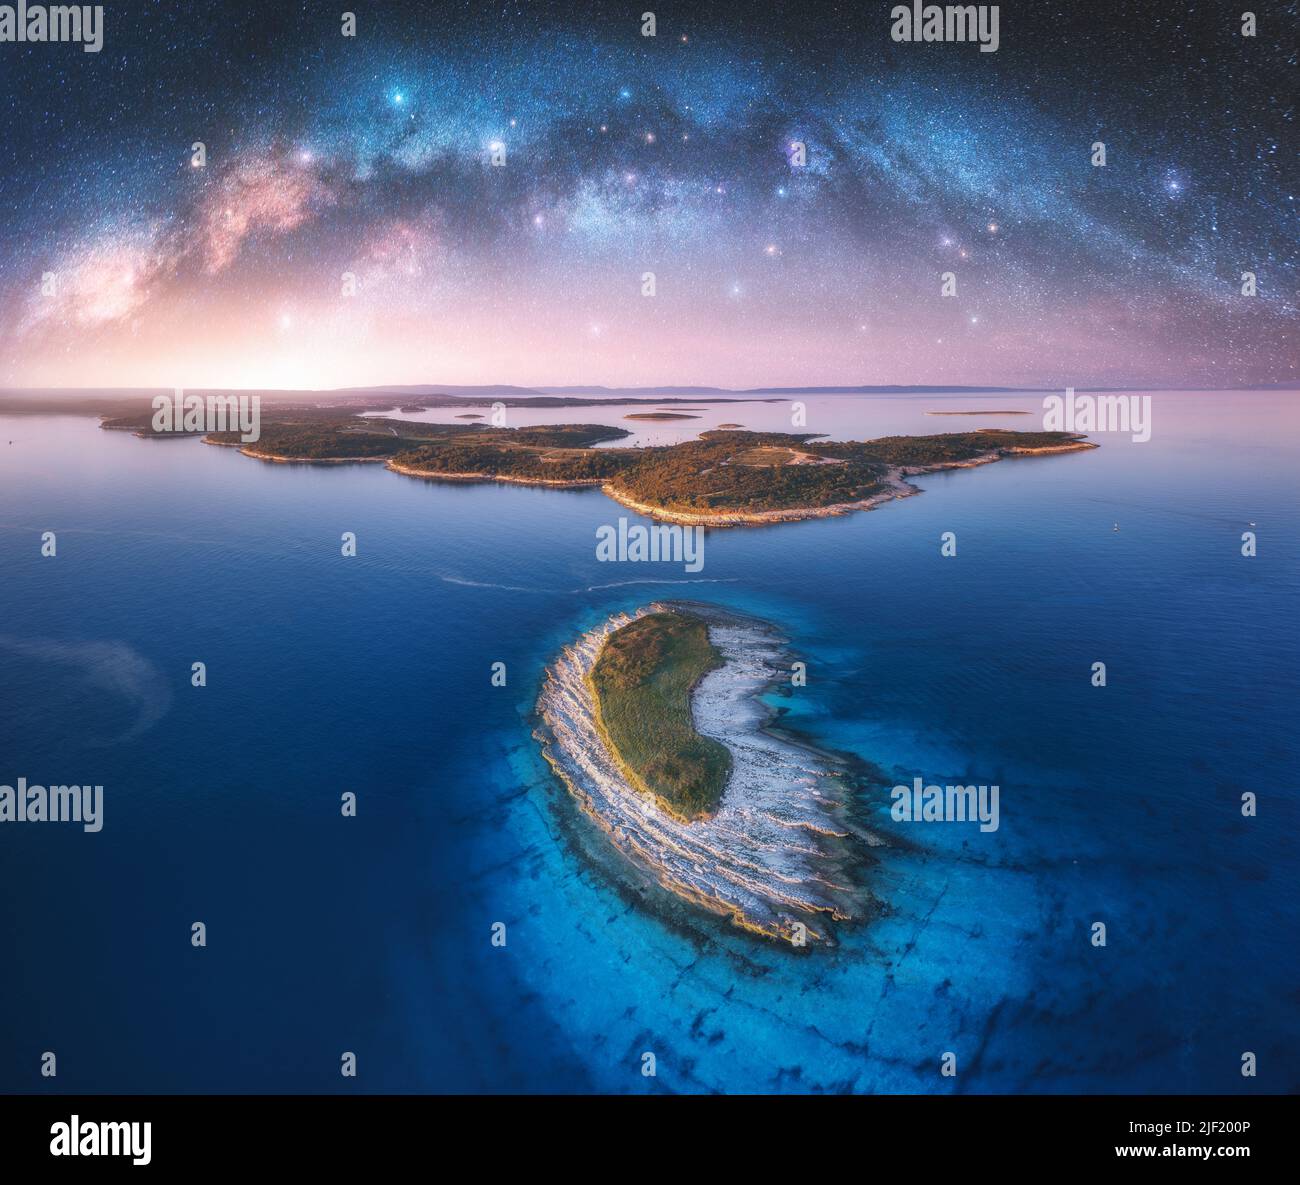 Milky Way arch and small island in the sea at summer night Stock Photo